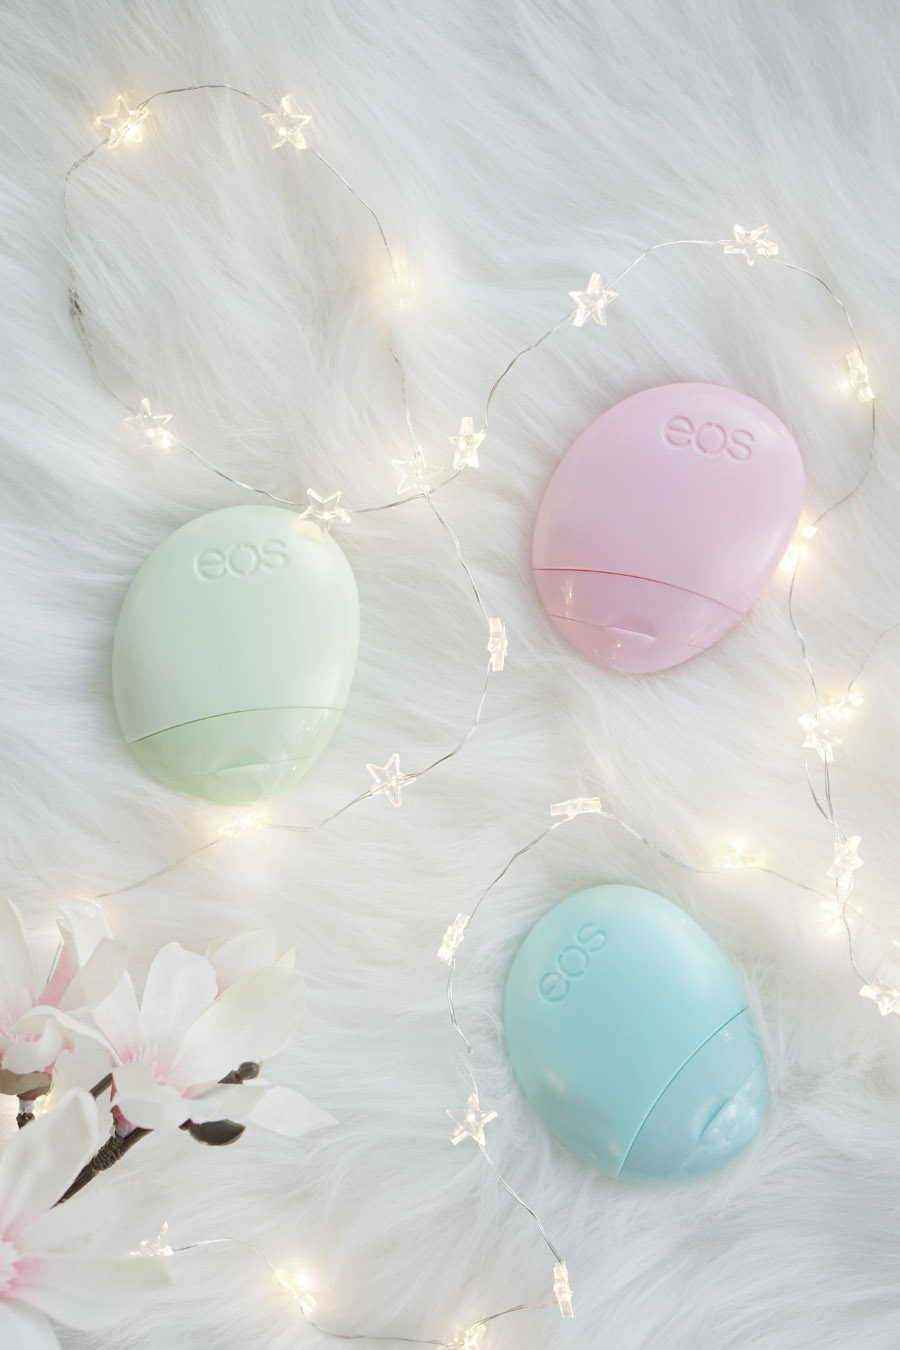 eos hand lotions 1